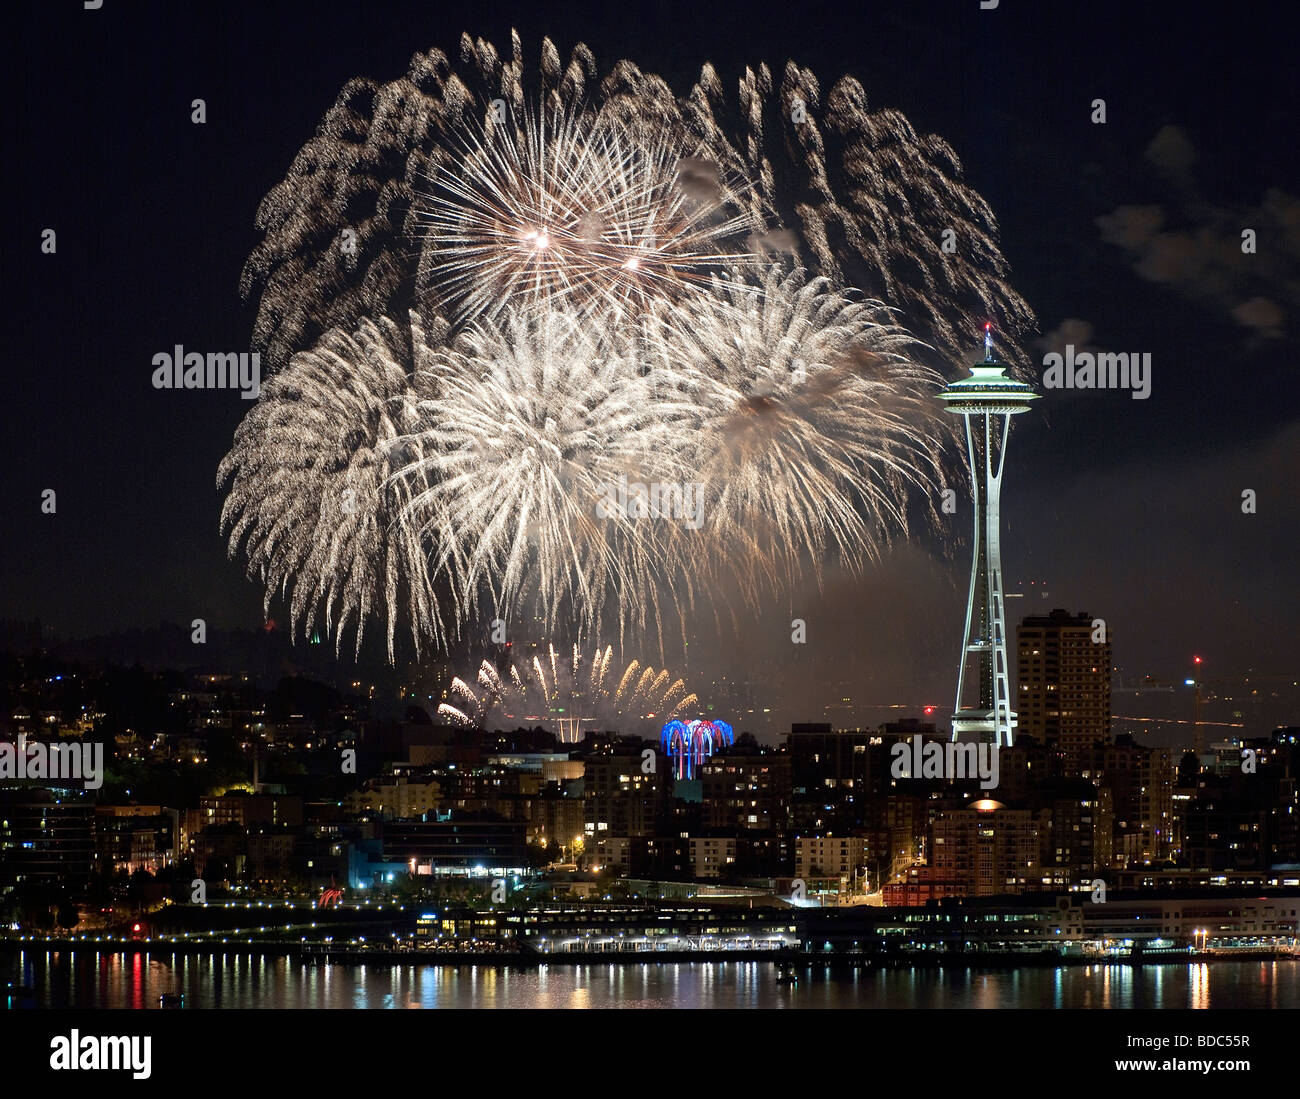 'Seattle waterfront on July 4th' Stock Photo